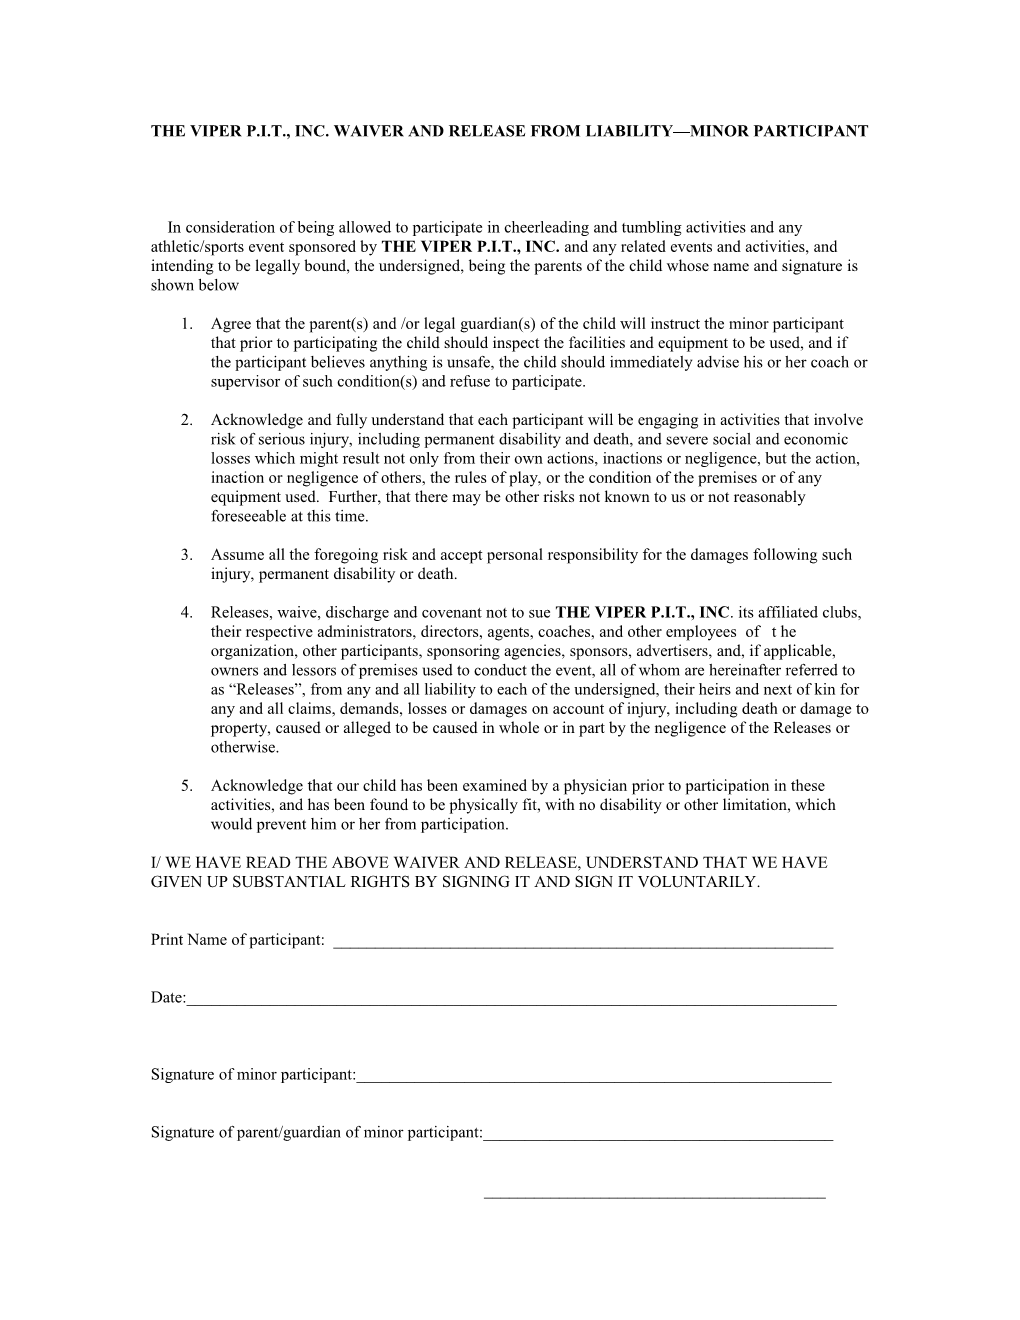 The Viper P.I.T., Inc. Waiver and Release from Liability Minor Participant